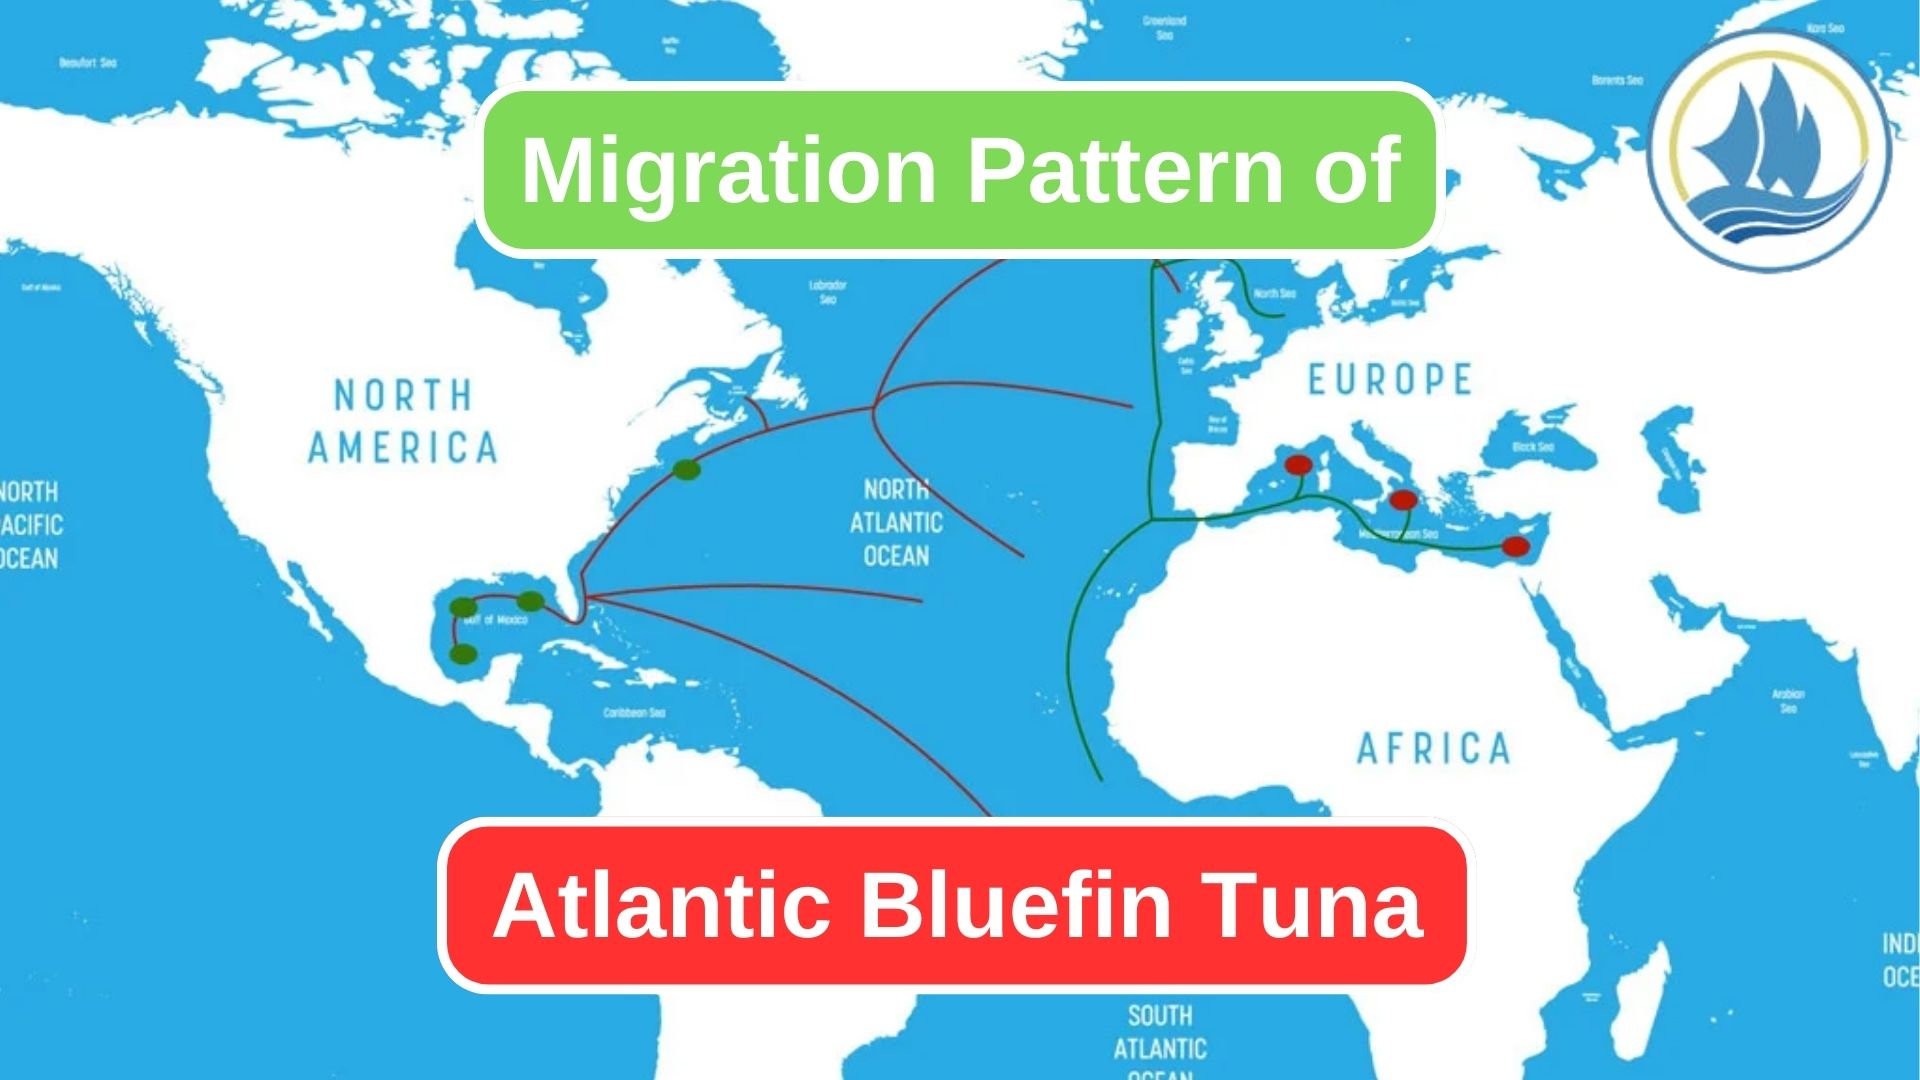 The Atlantic Bluefin Tuna Remarkable Migration Patterns